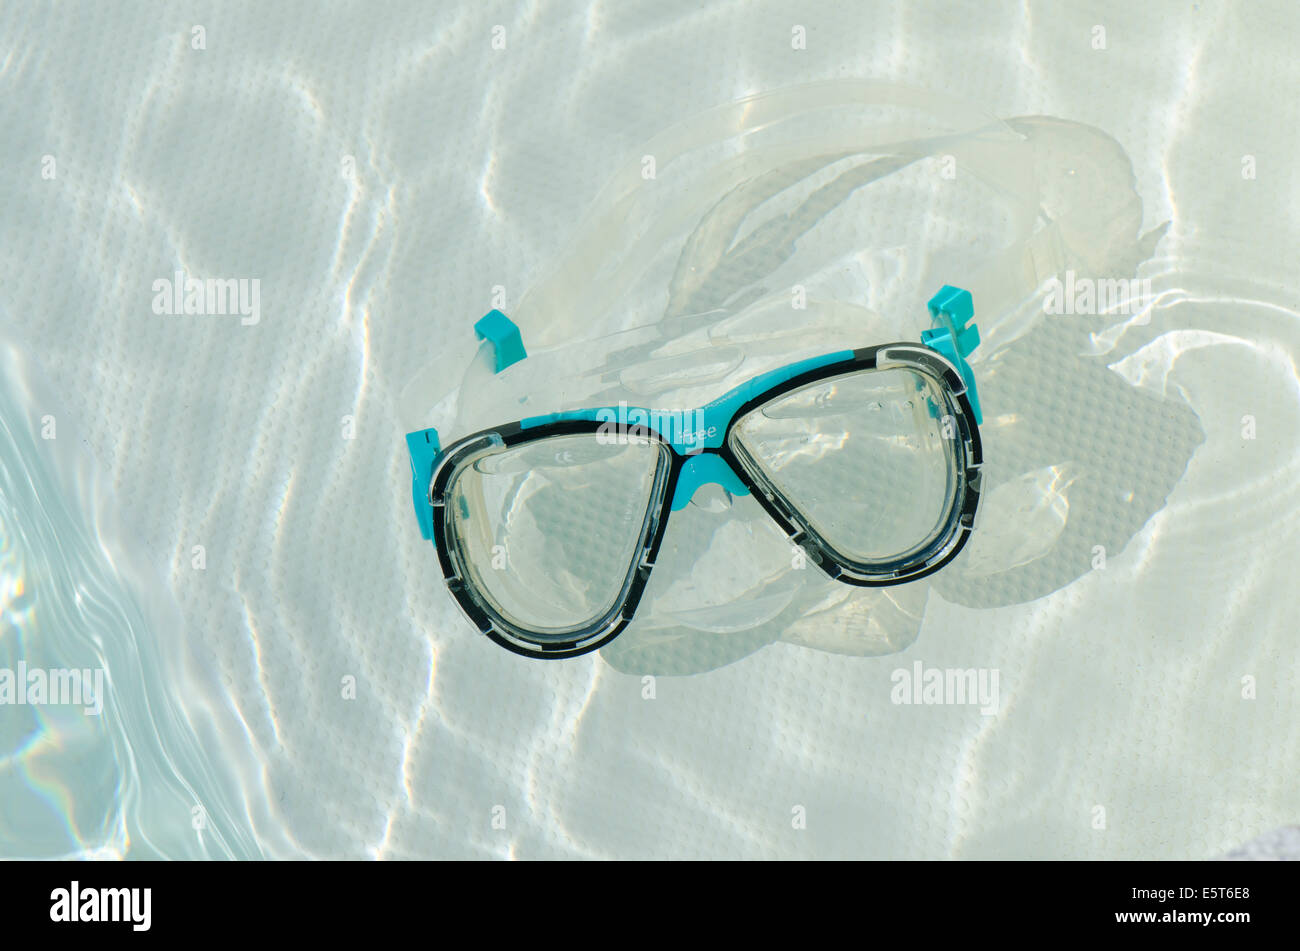 Diving mask or goggles floating in swimming pool. Stock Photo